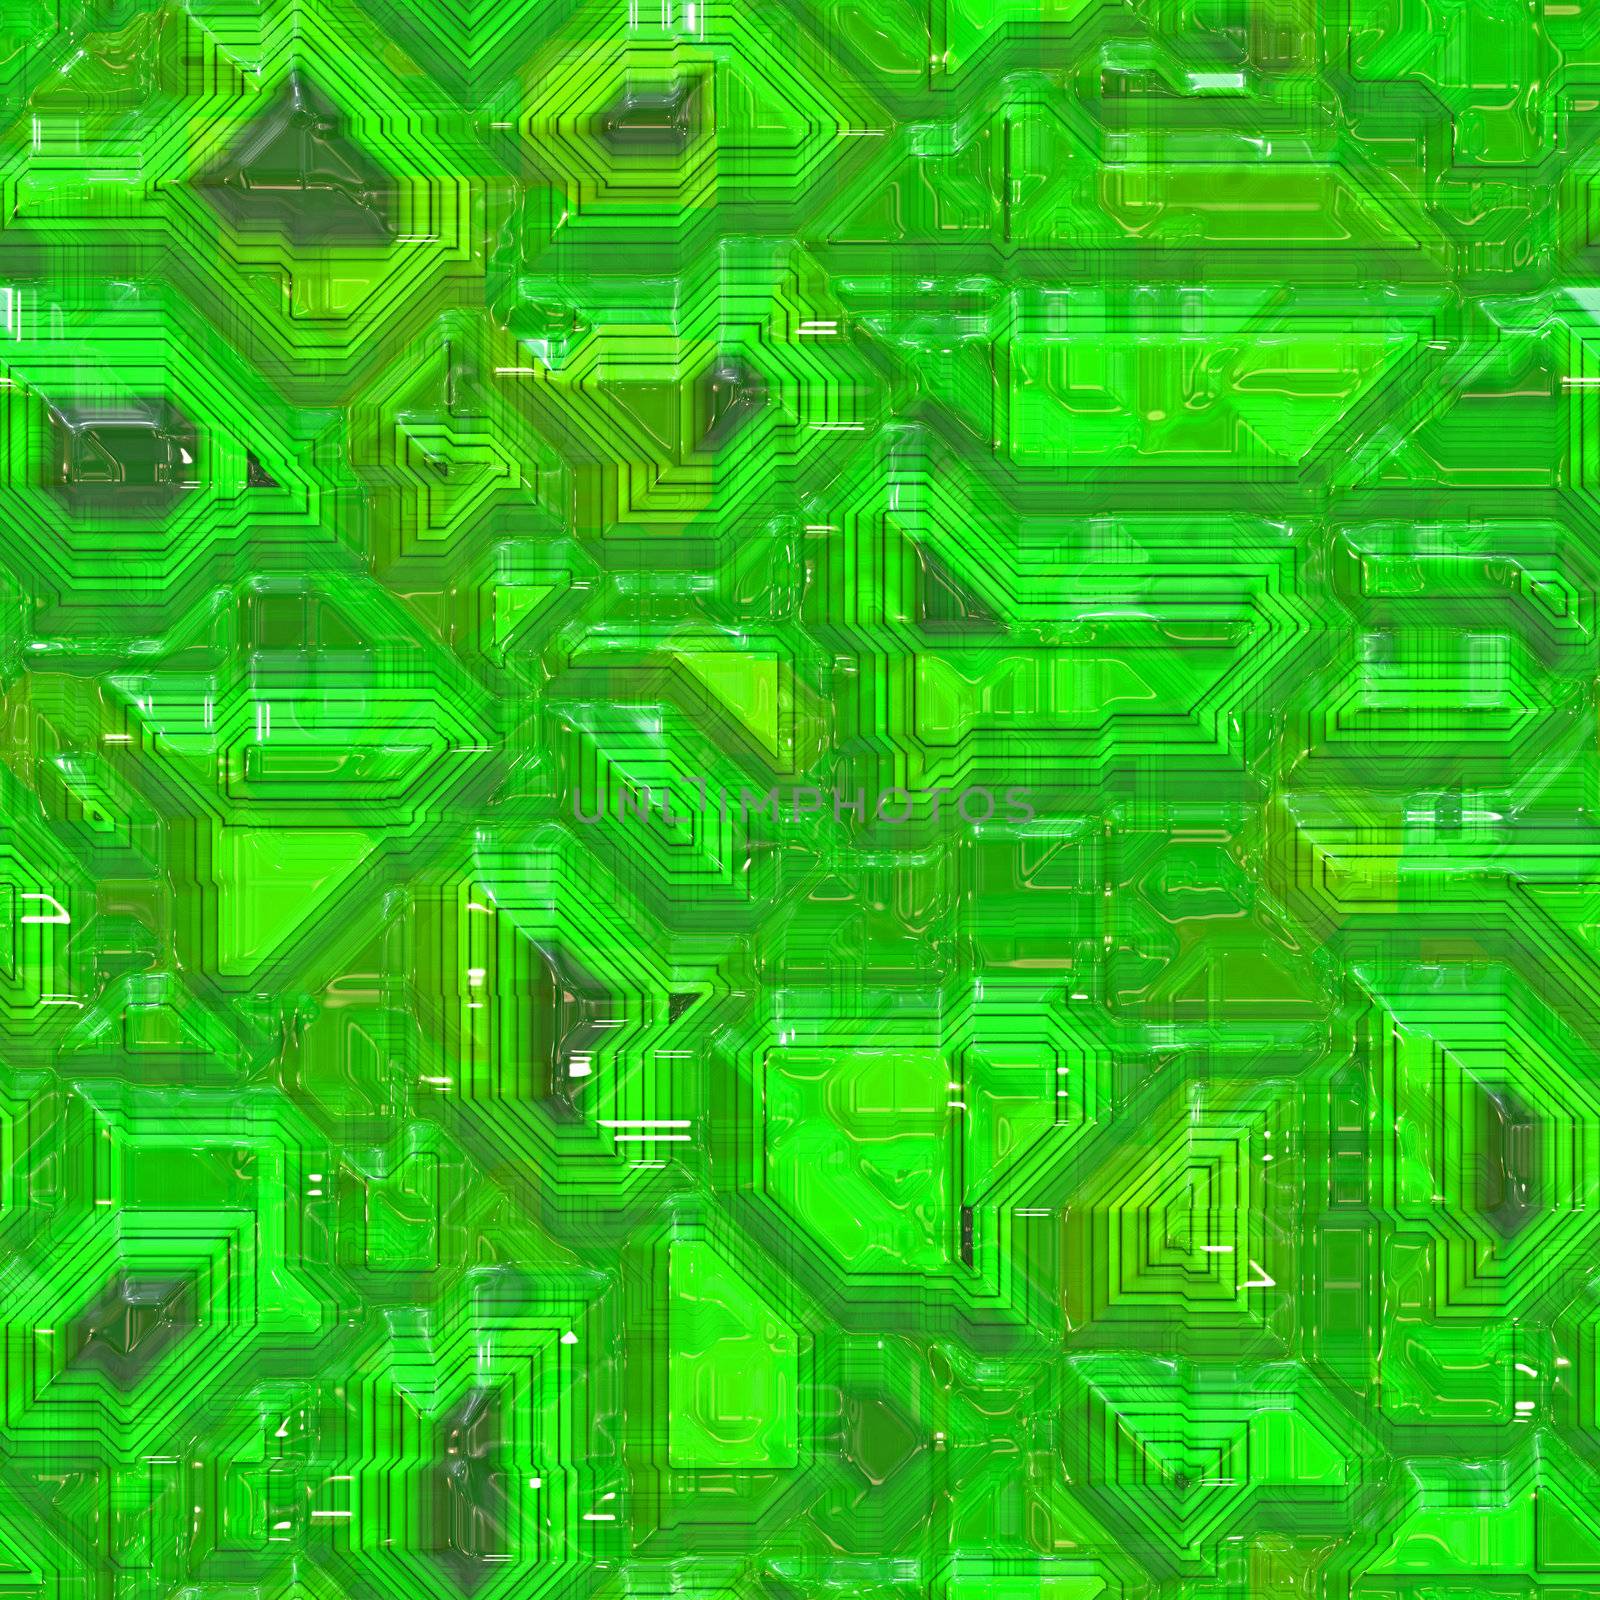 Seamless computer circuity pattern in a lime green hue.